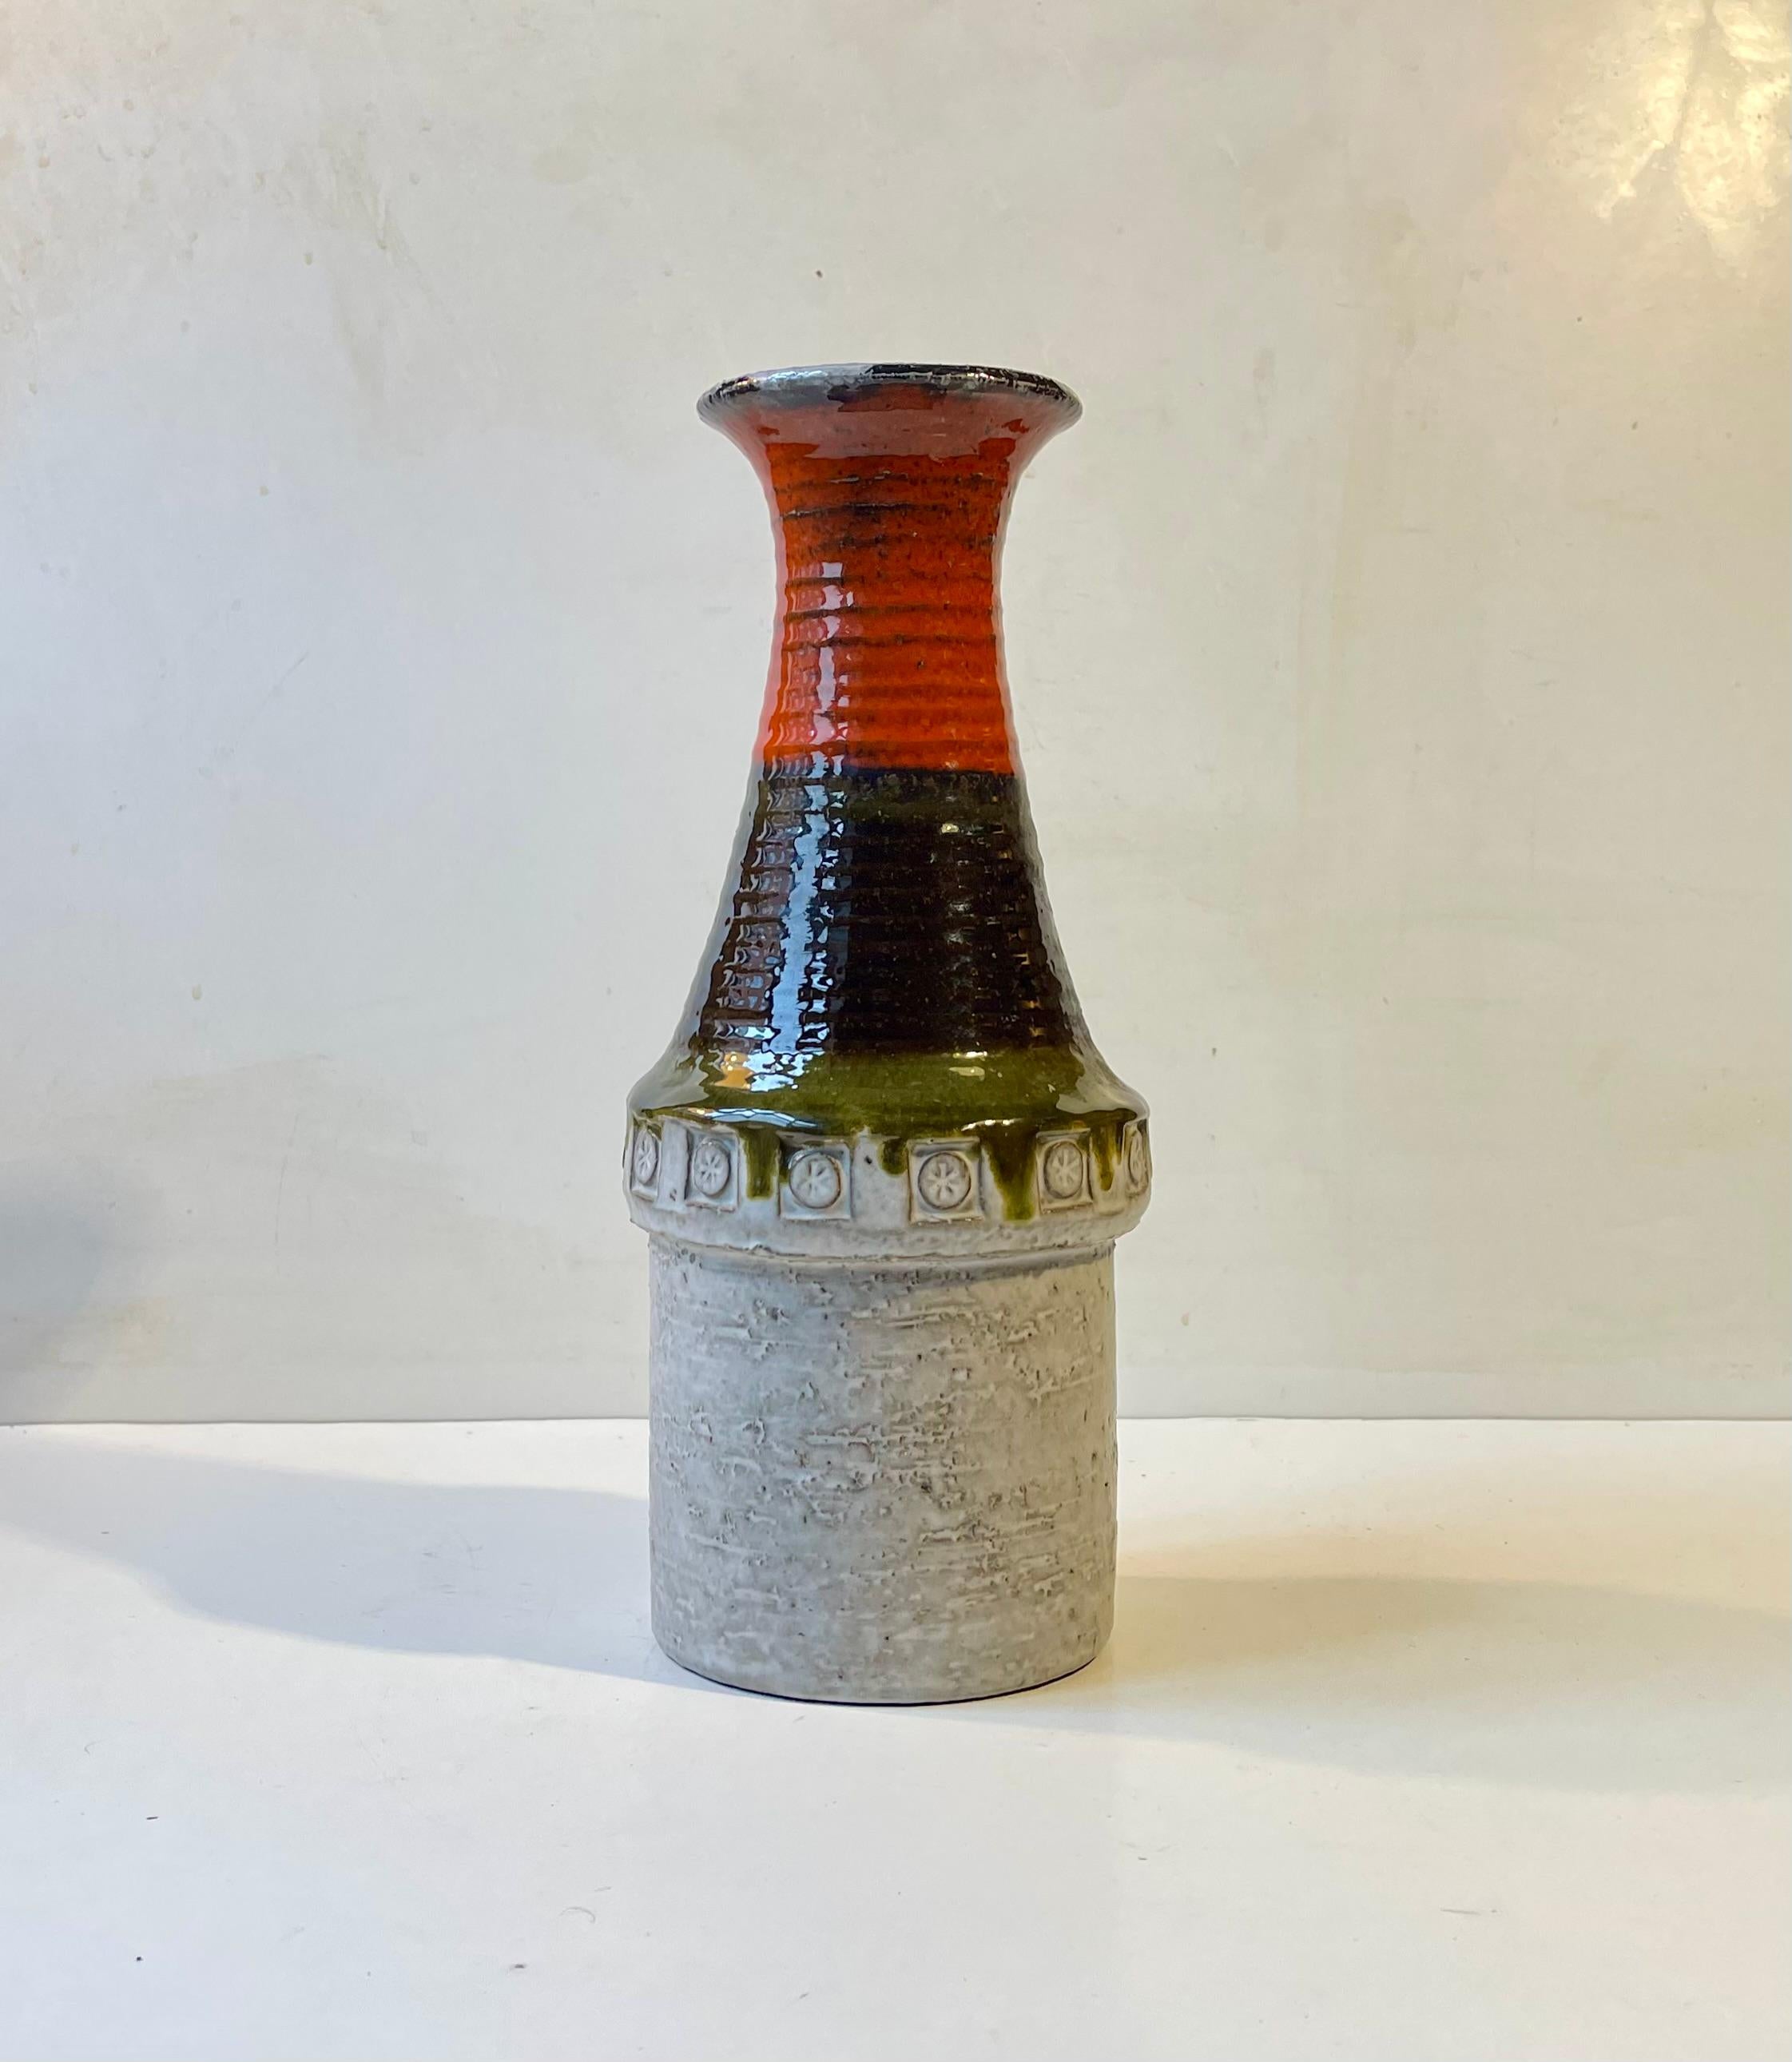 A rare and rather large chamotte clay stoneware vase executed in 'tricolore' glazes in green, red (orange), black, and grey (white). Much like the Italian flag. Decorated with circular geometric sun or flower like incisions towards the border of the